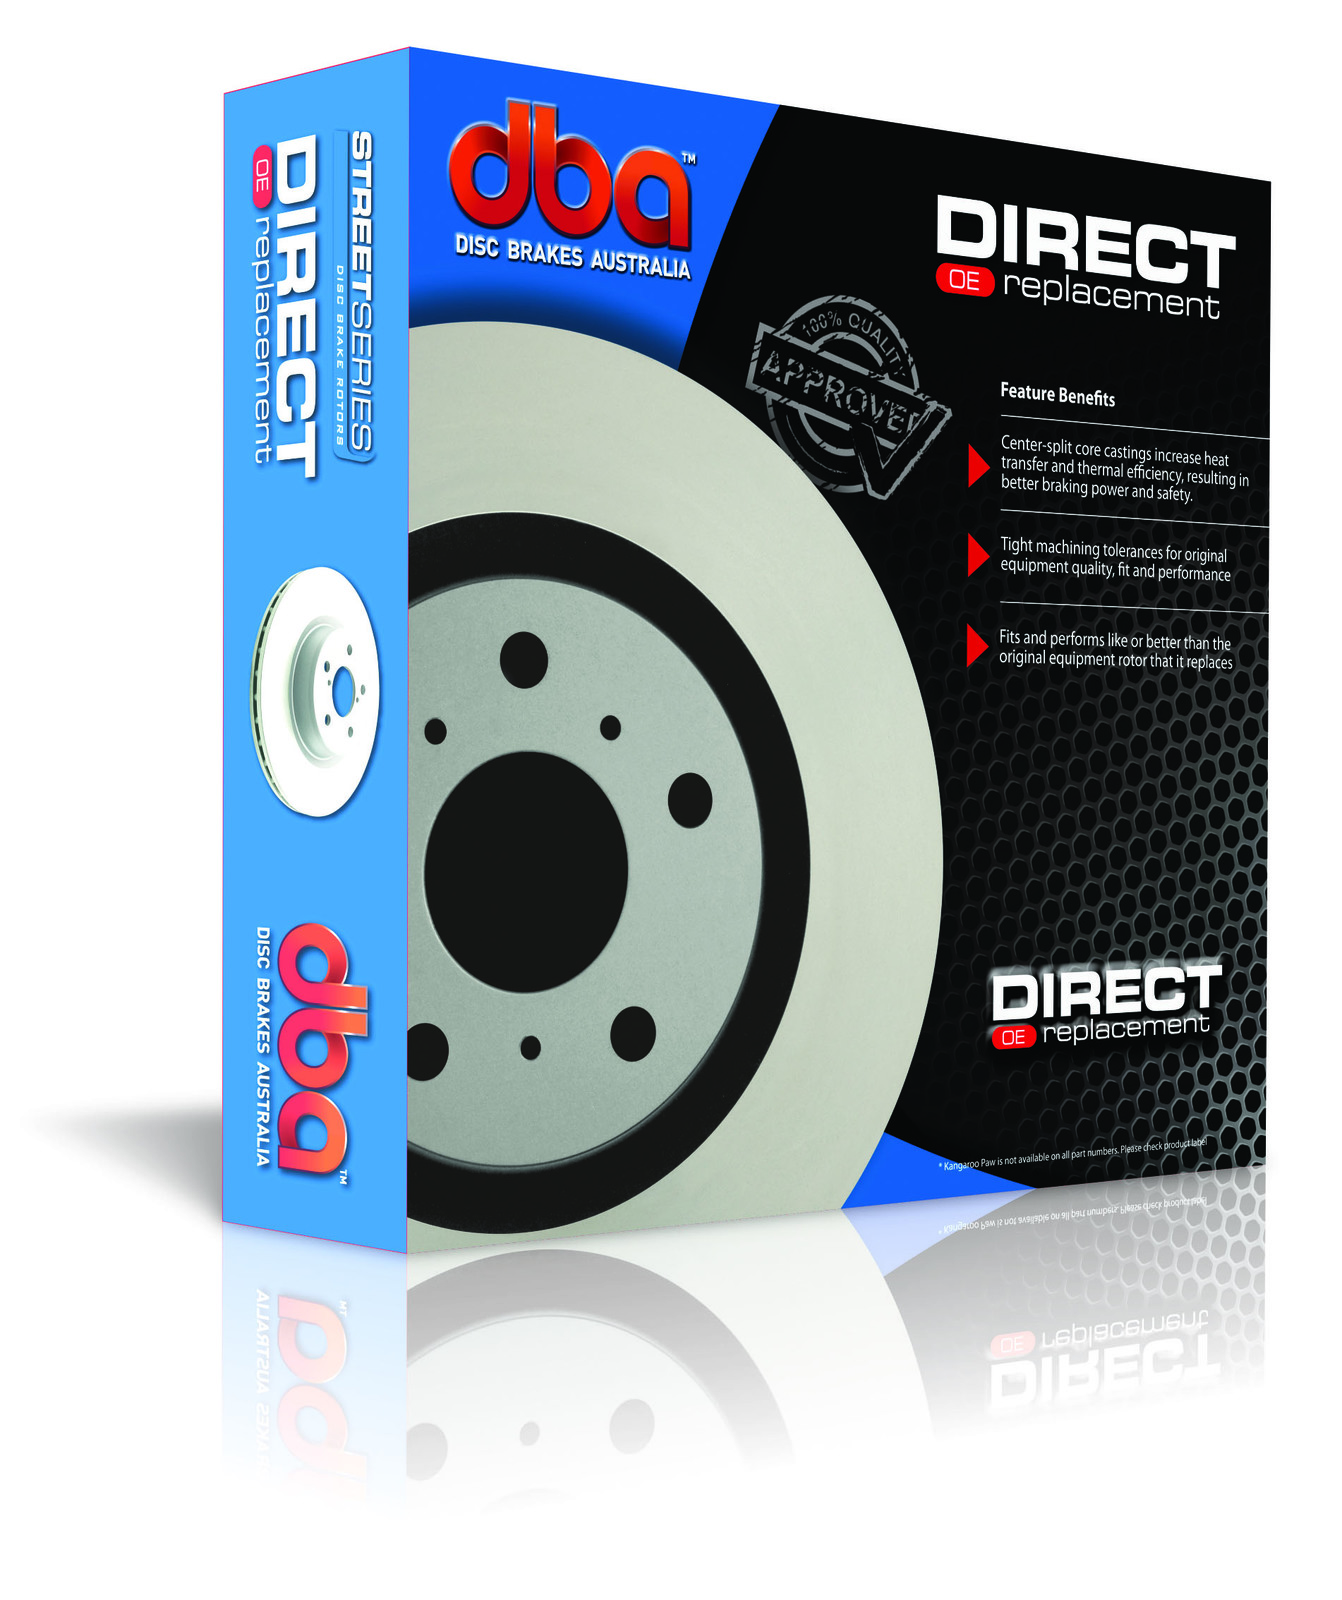 2 x DBA T2 Slotted Rotor FOR FORD TICKFORD TS 50 AU DBA503S